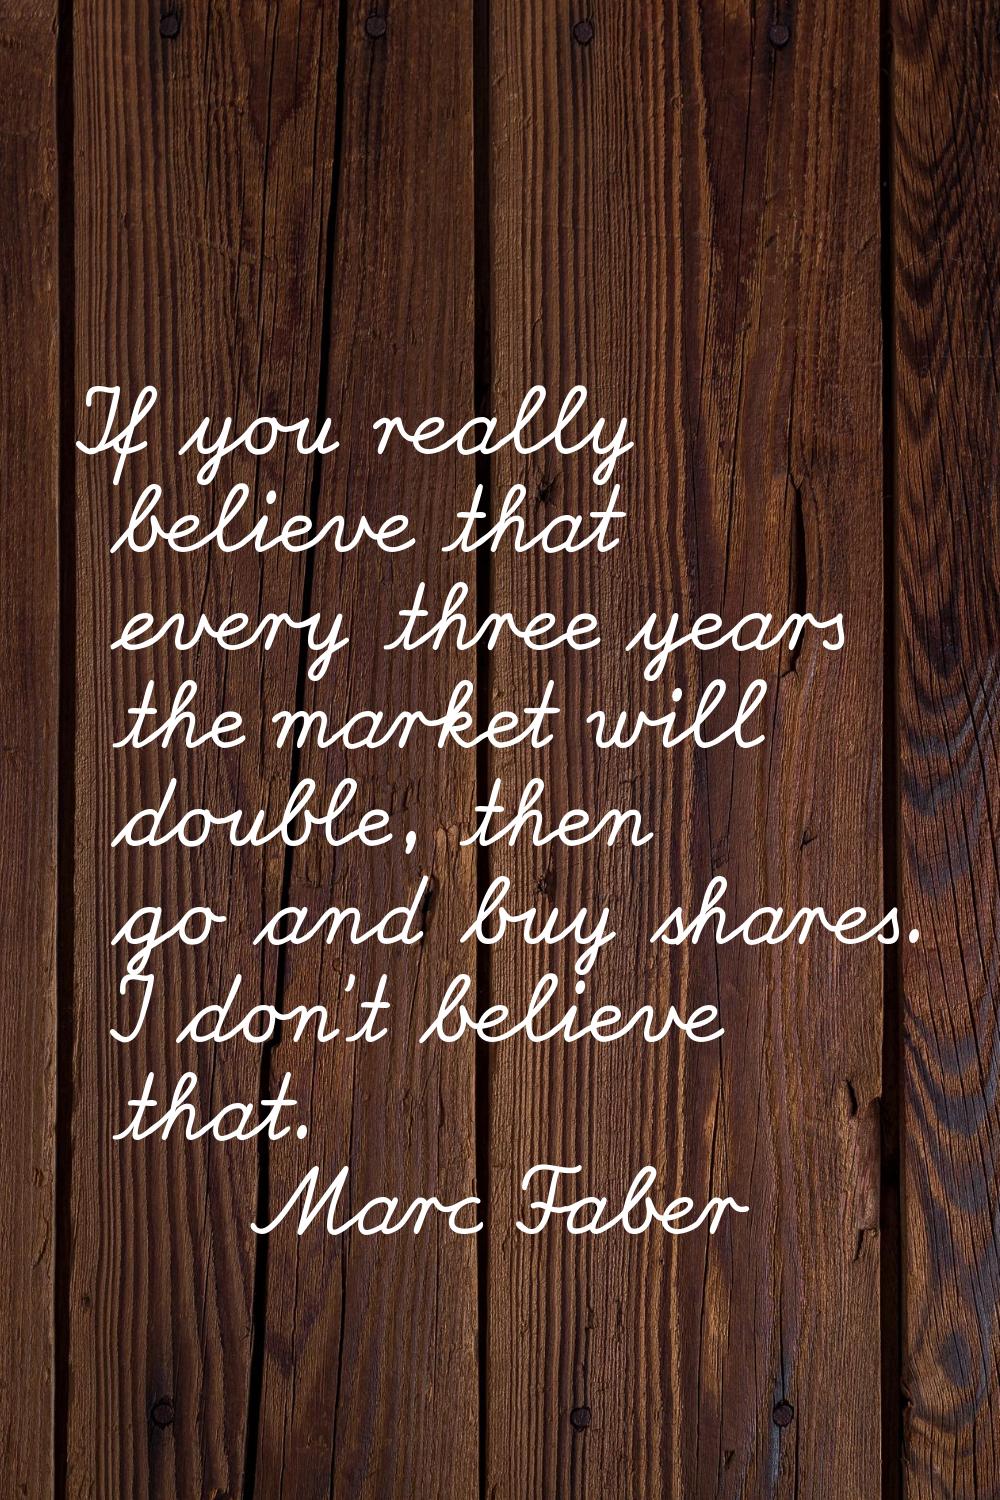 If you really believe that every three years the market will double, then go and buy shares. I don'